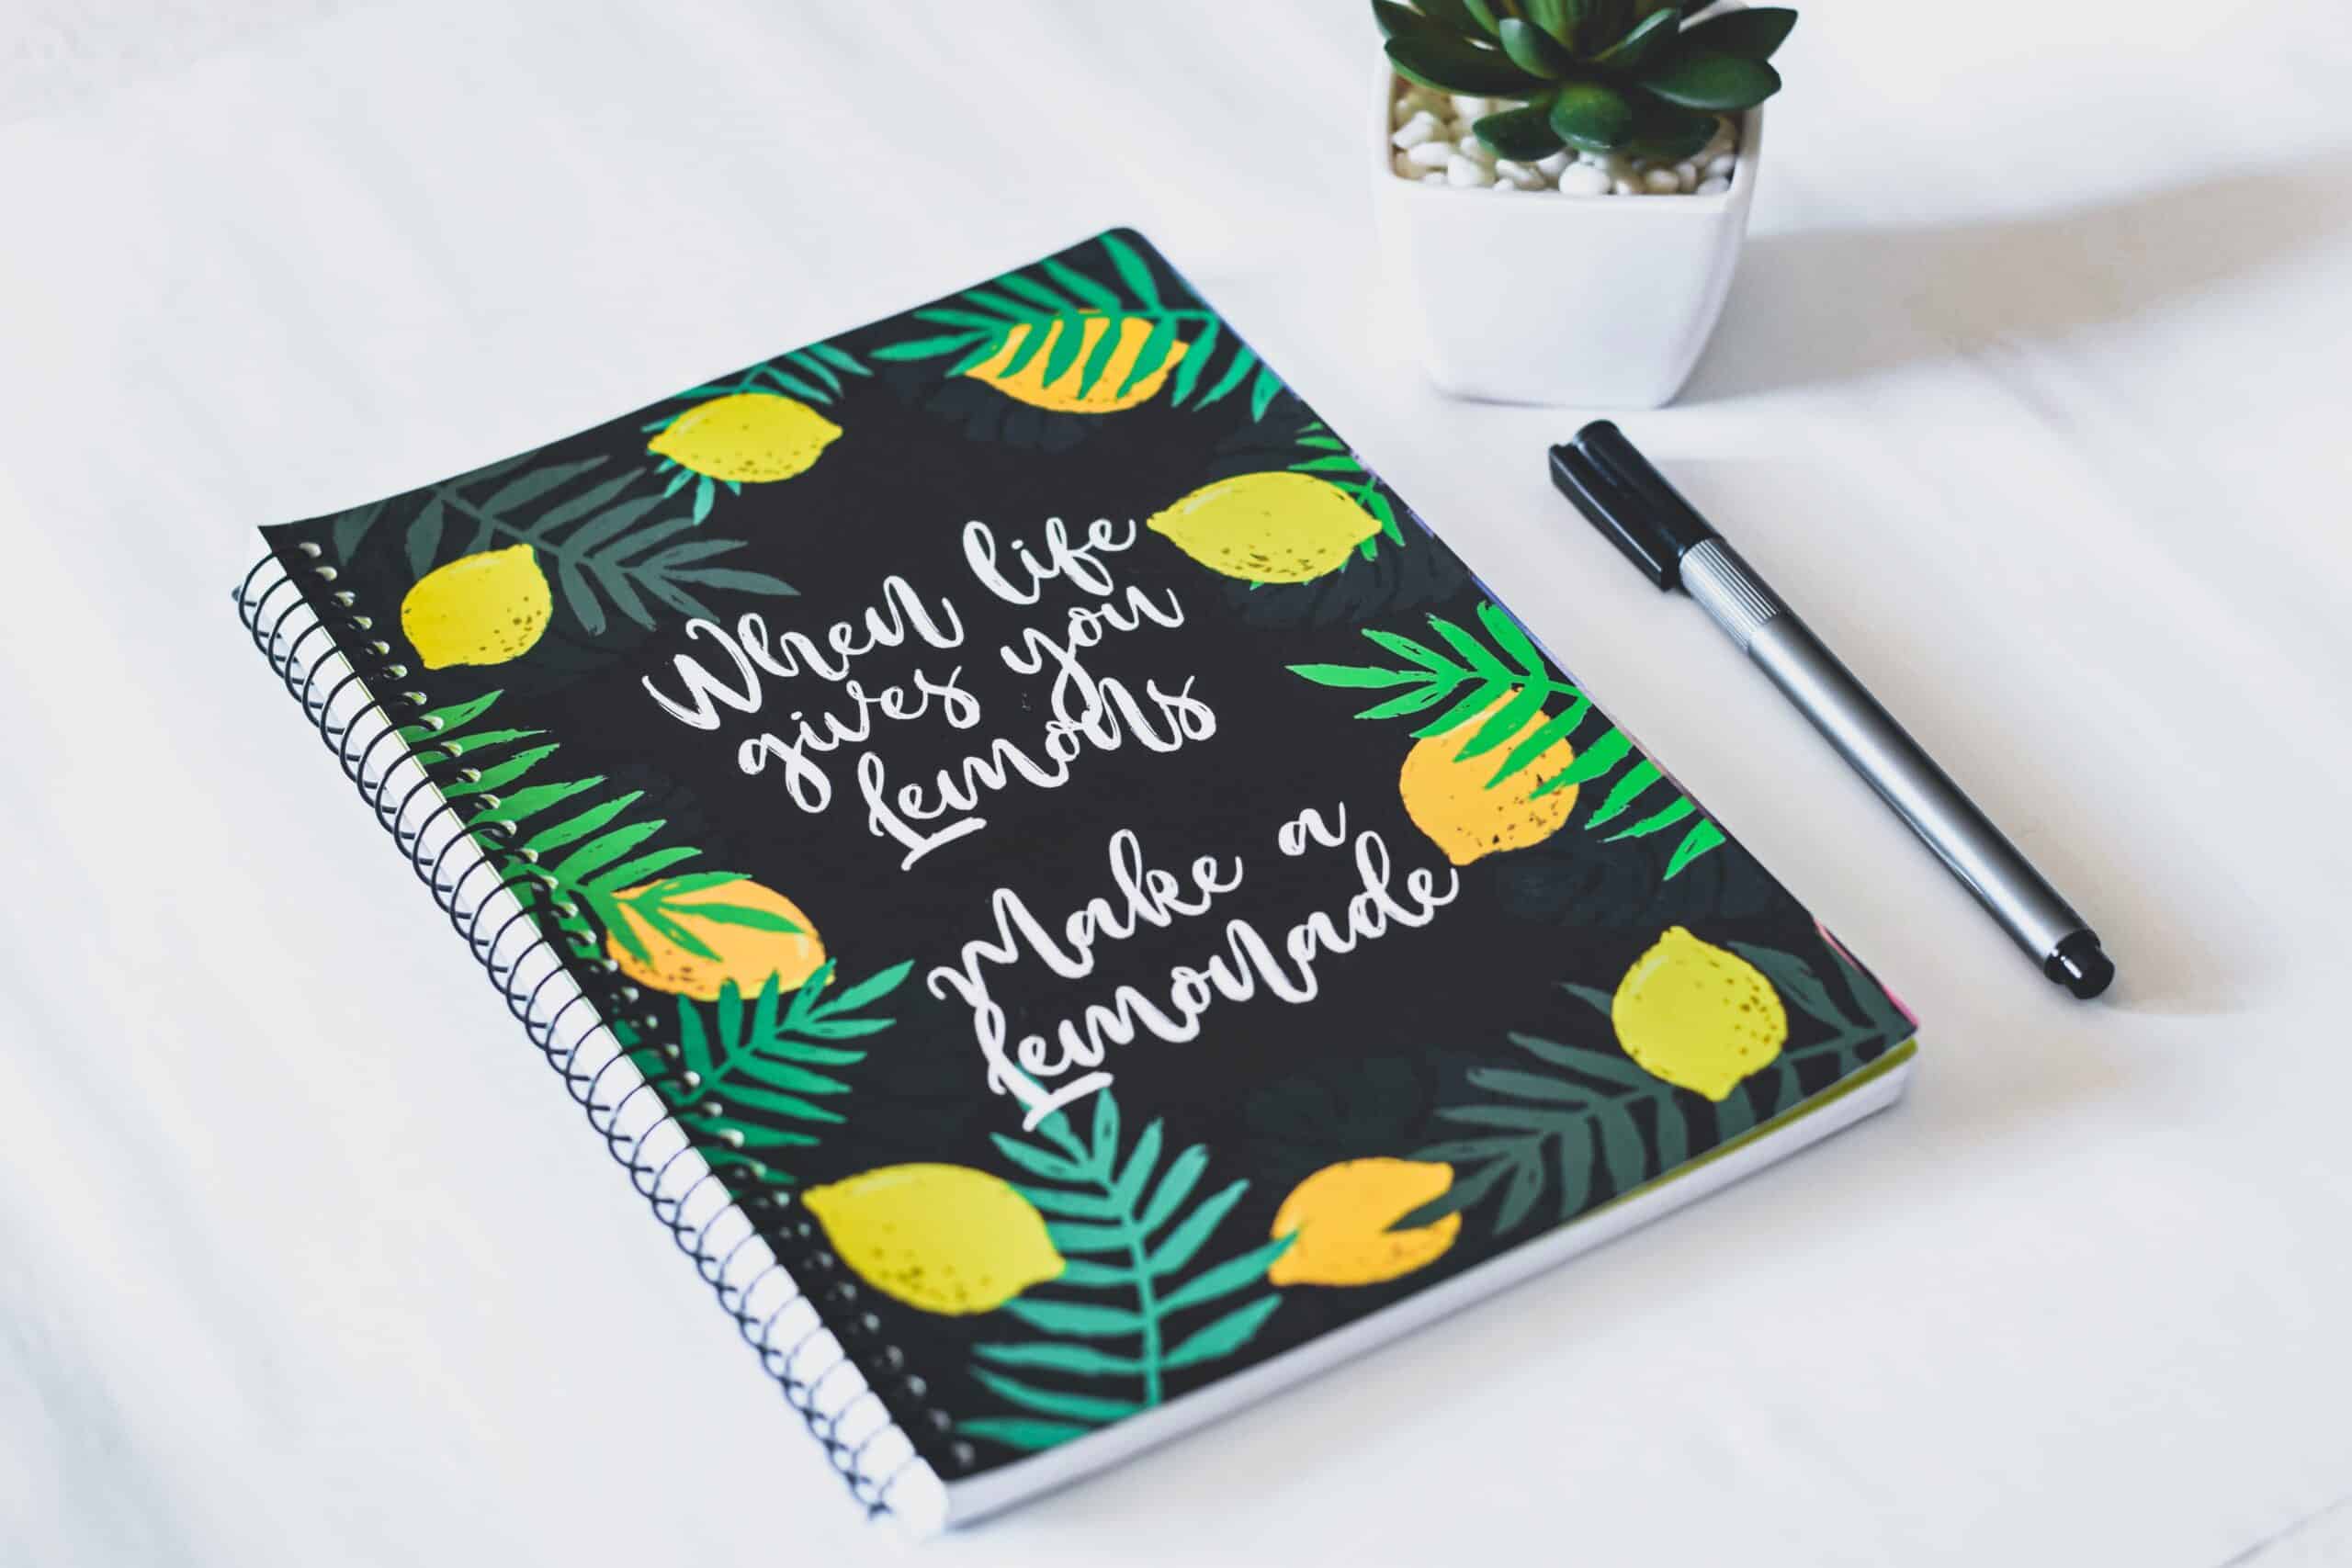 Notebook with an inspirational quote on the cover